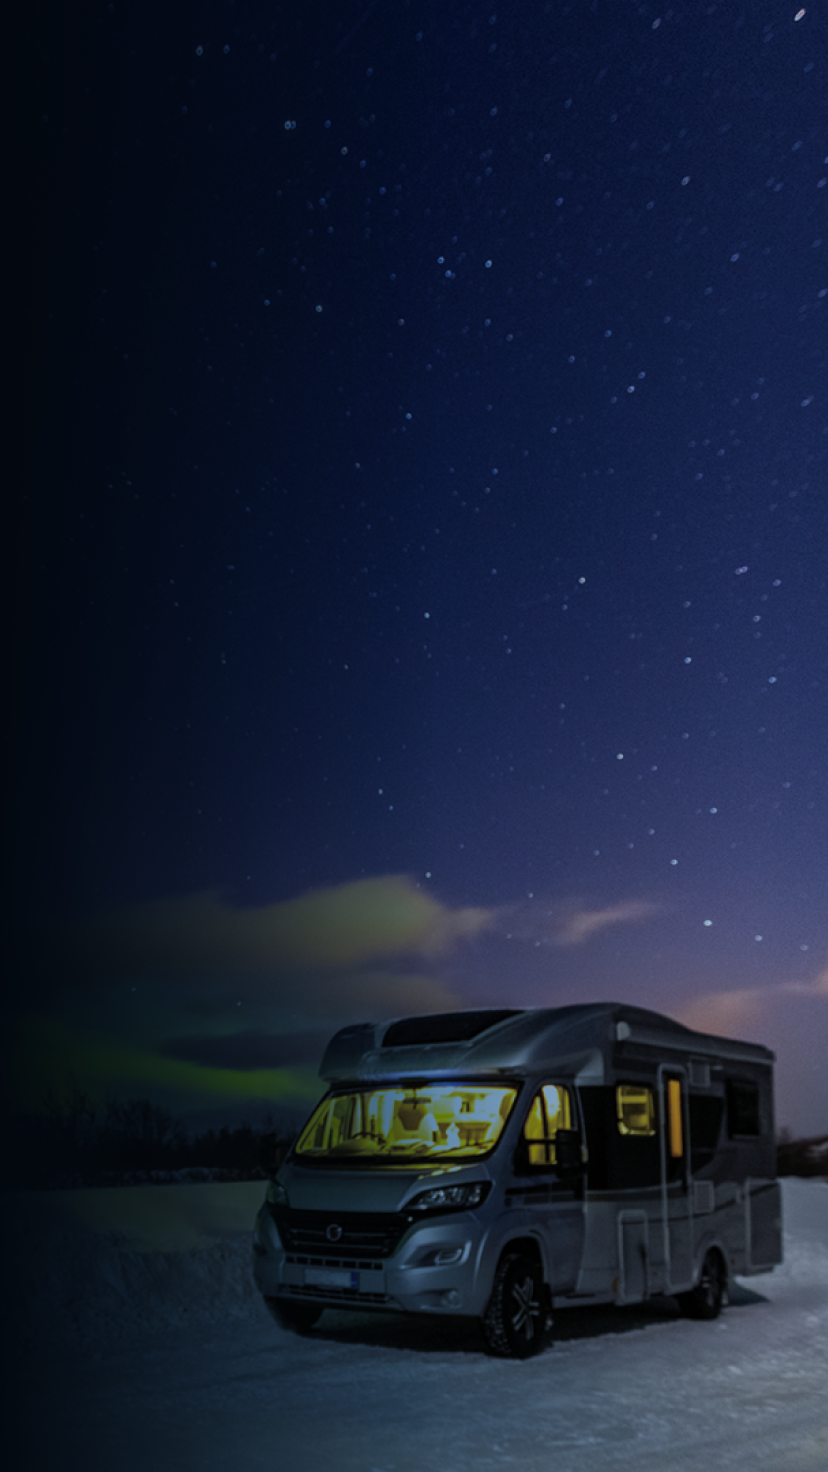 A lit-up RV in a snowy area with the stars and northern lights in the sky. 